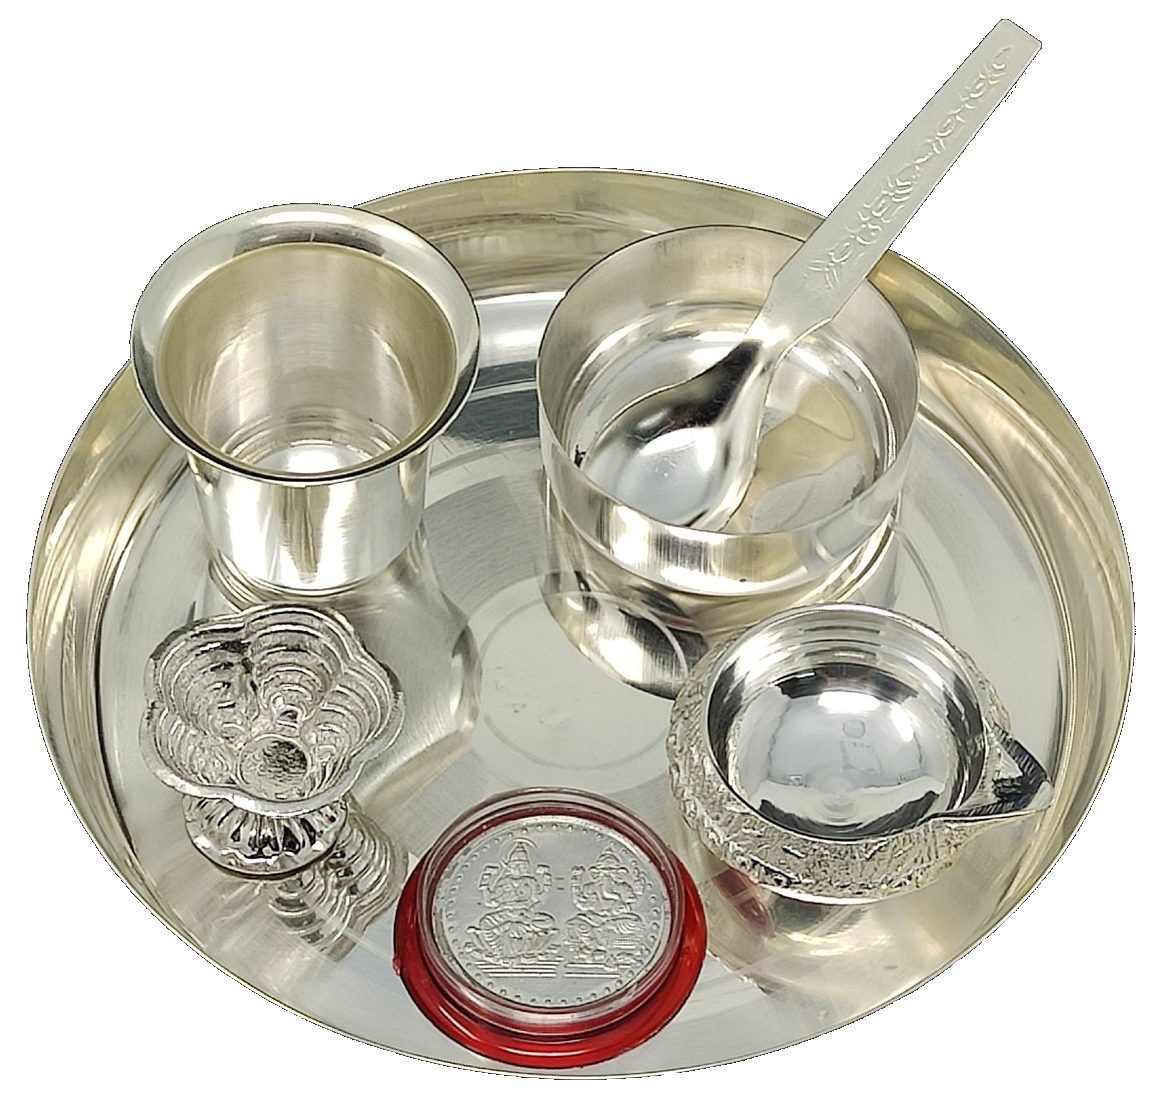 BENGALEN Silver Plated Pooja Thali Set 6 Inch with Kuber Diya Coin and Accessories Puja Decorative Items for Home Mandir Office Wedding Return Gift